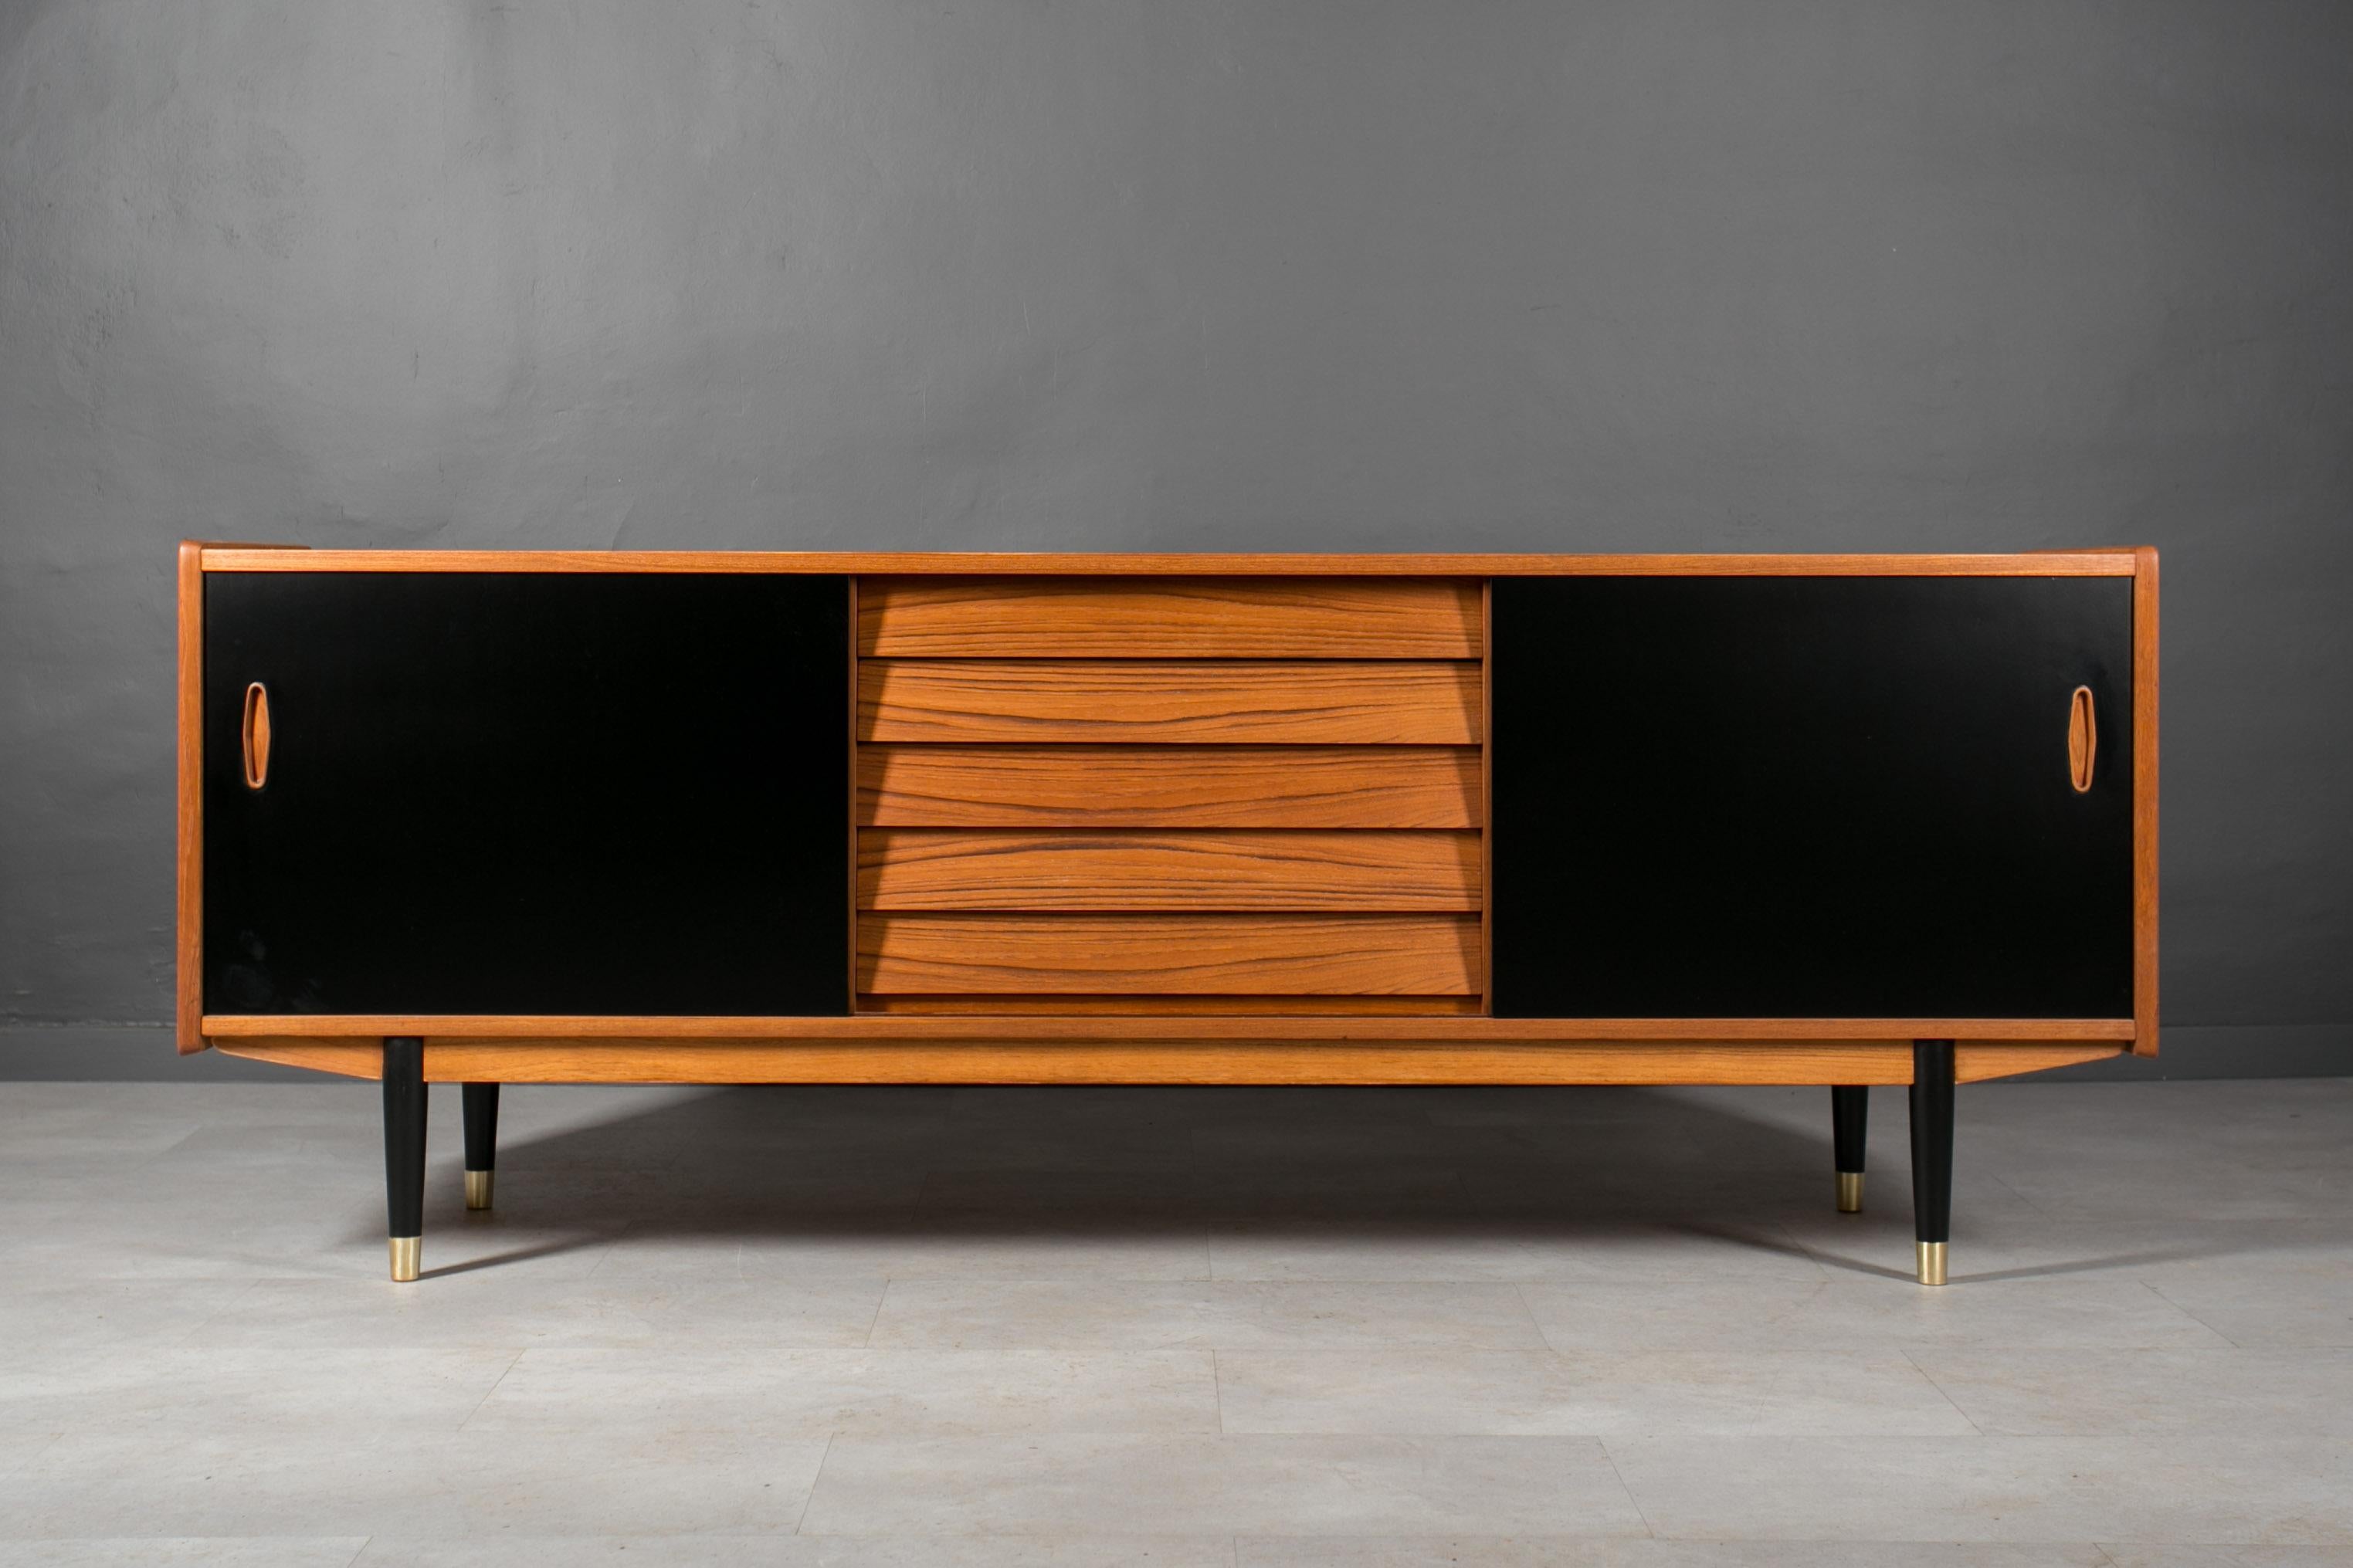 Discover the exquisite craftsmanship of this unique Nils Jonsson teakwood sideboard, boasting a distinctive Scandinavian Modern style. Crafted with precision and elegance, it features sleek black sliding doors adorned with two sculpted handles and a